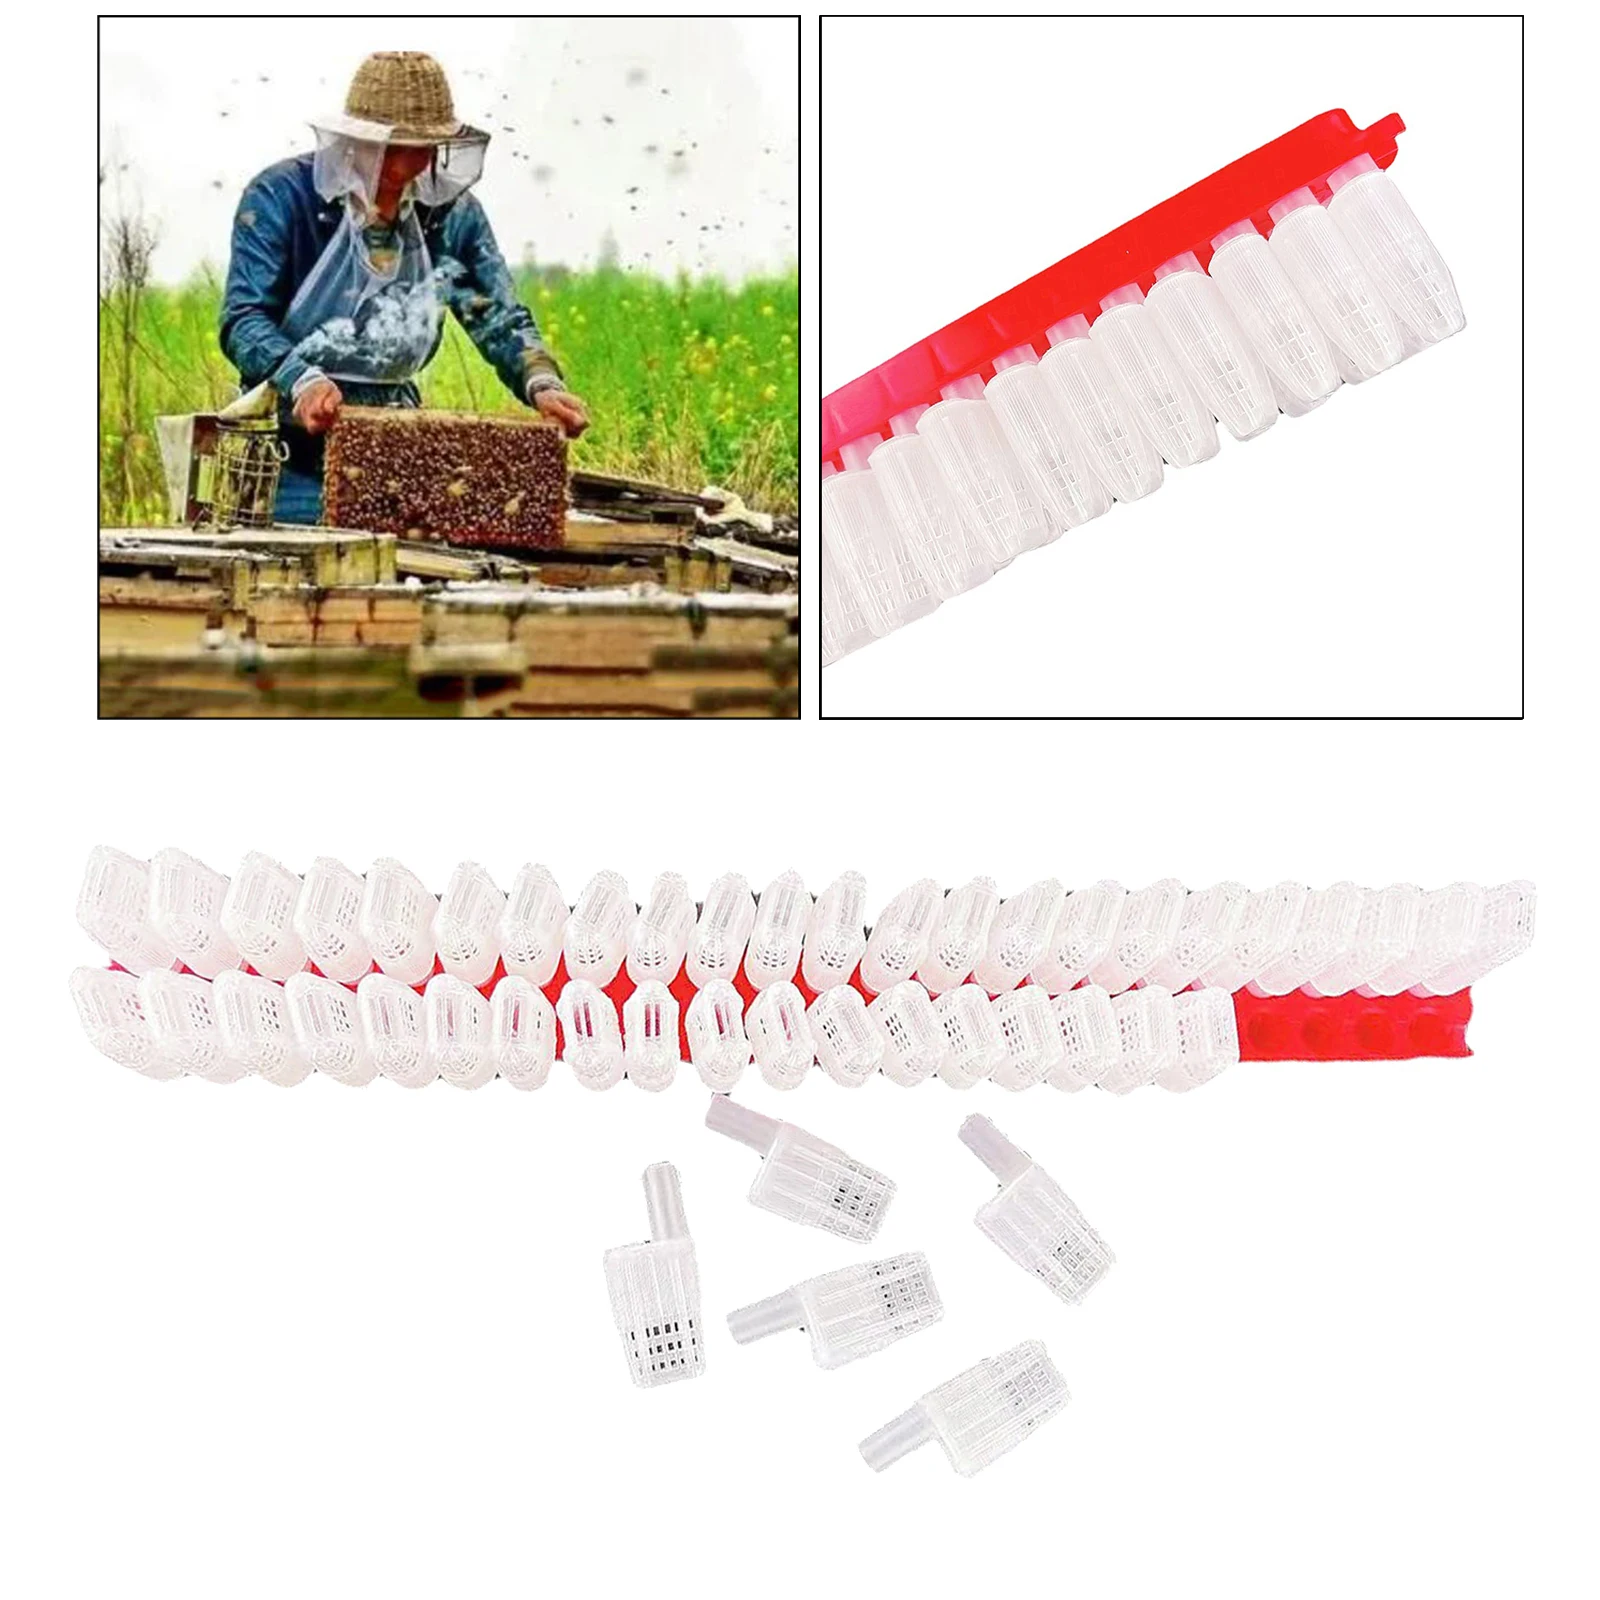 46 PCS Plastic Queen Bee Moving Isolator Hive Rearing Box Cage Protection Case Beekeeping Beekeeper Equipment Supplies